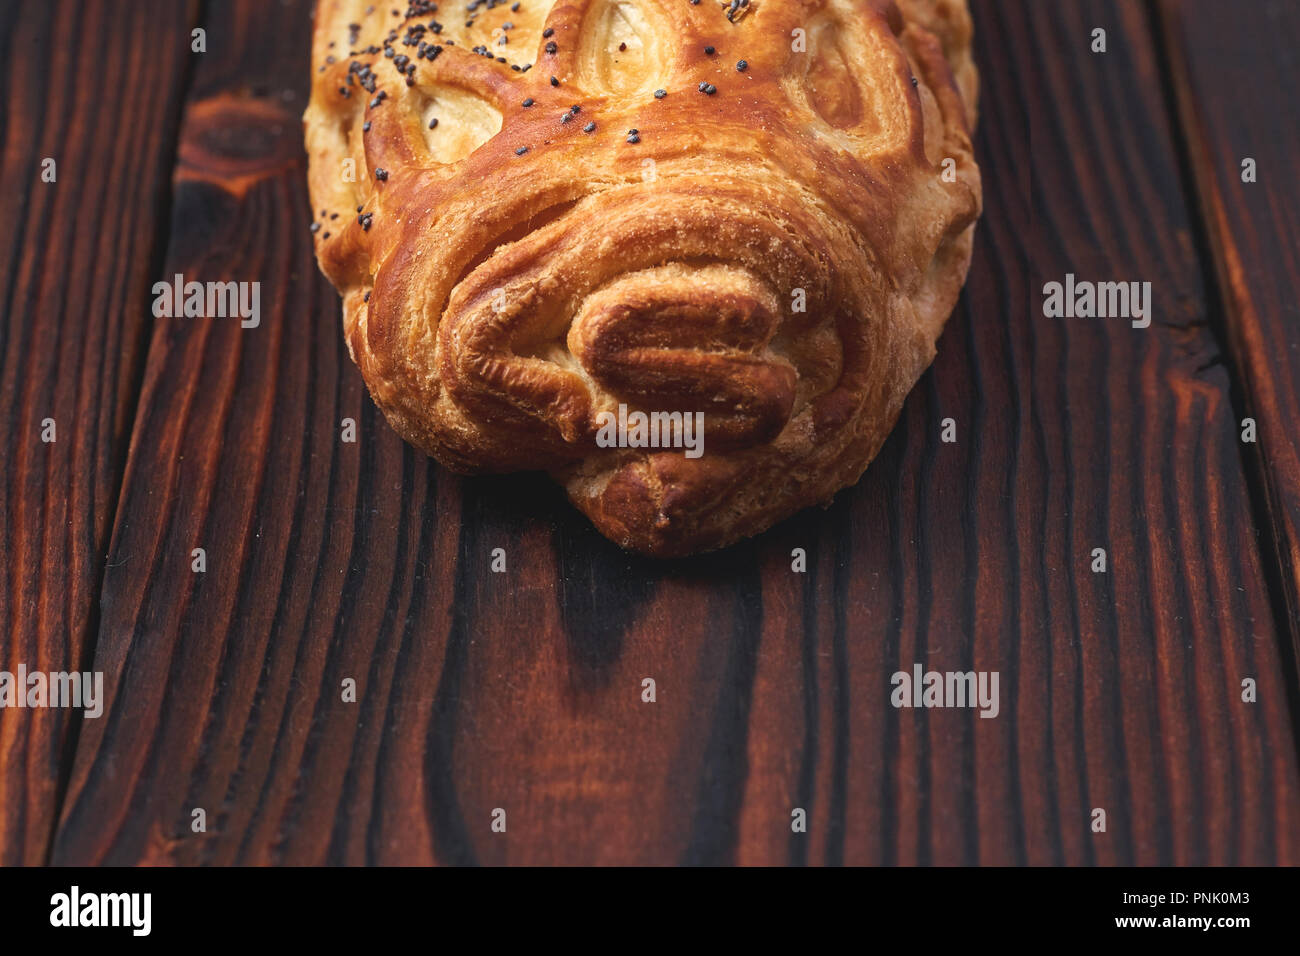 Baked bun with flaky pastry sprinkled with poppy seeds on a dark wooden background. Close-up. Food background. Stock Photo